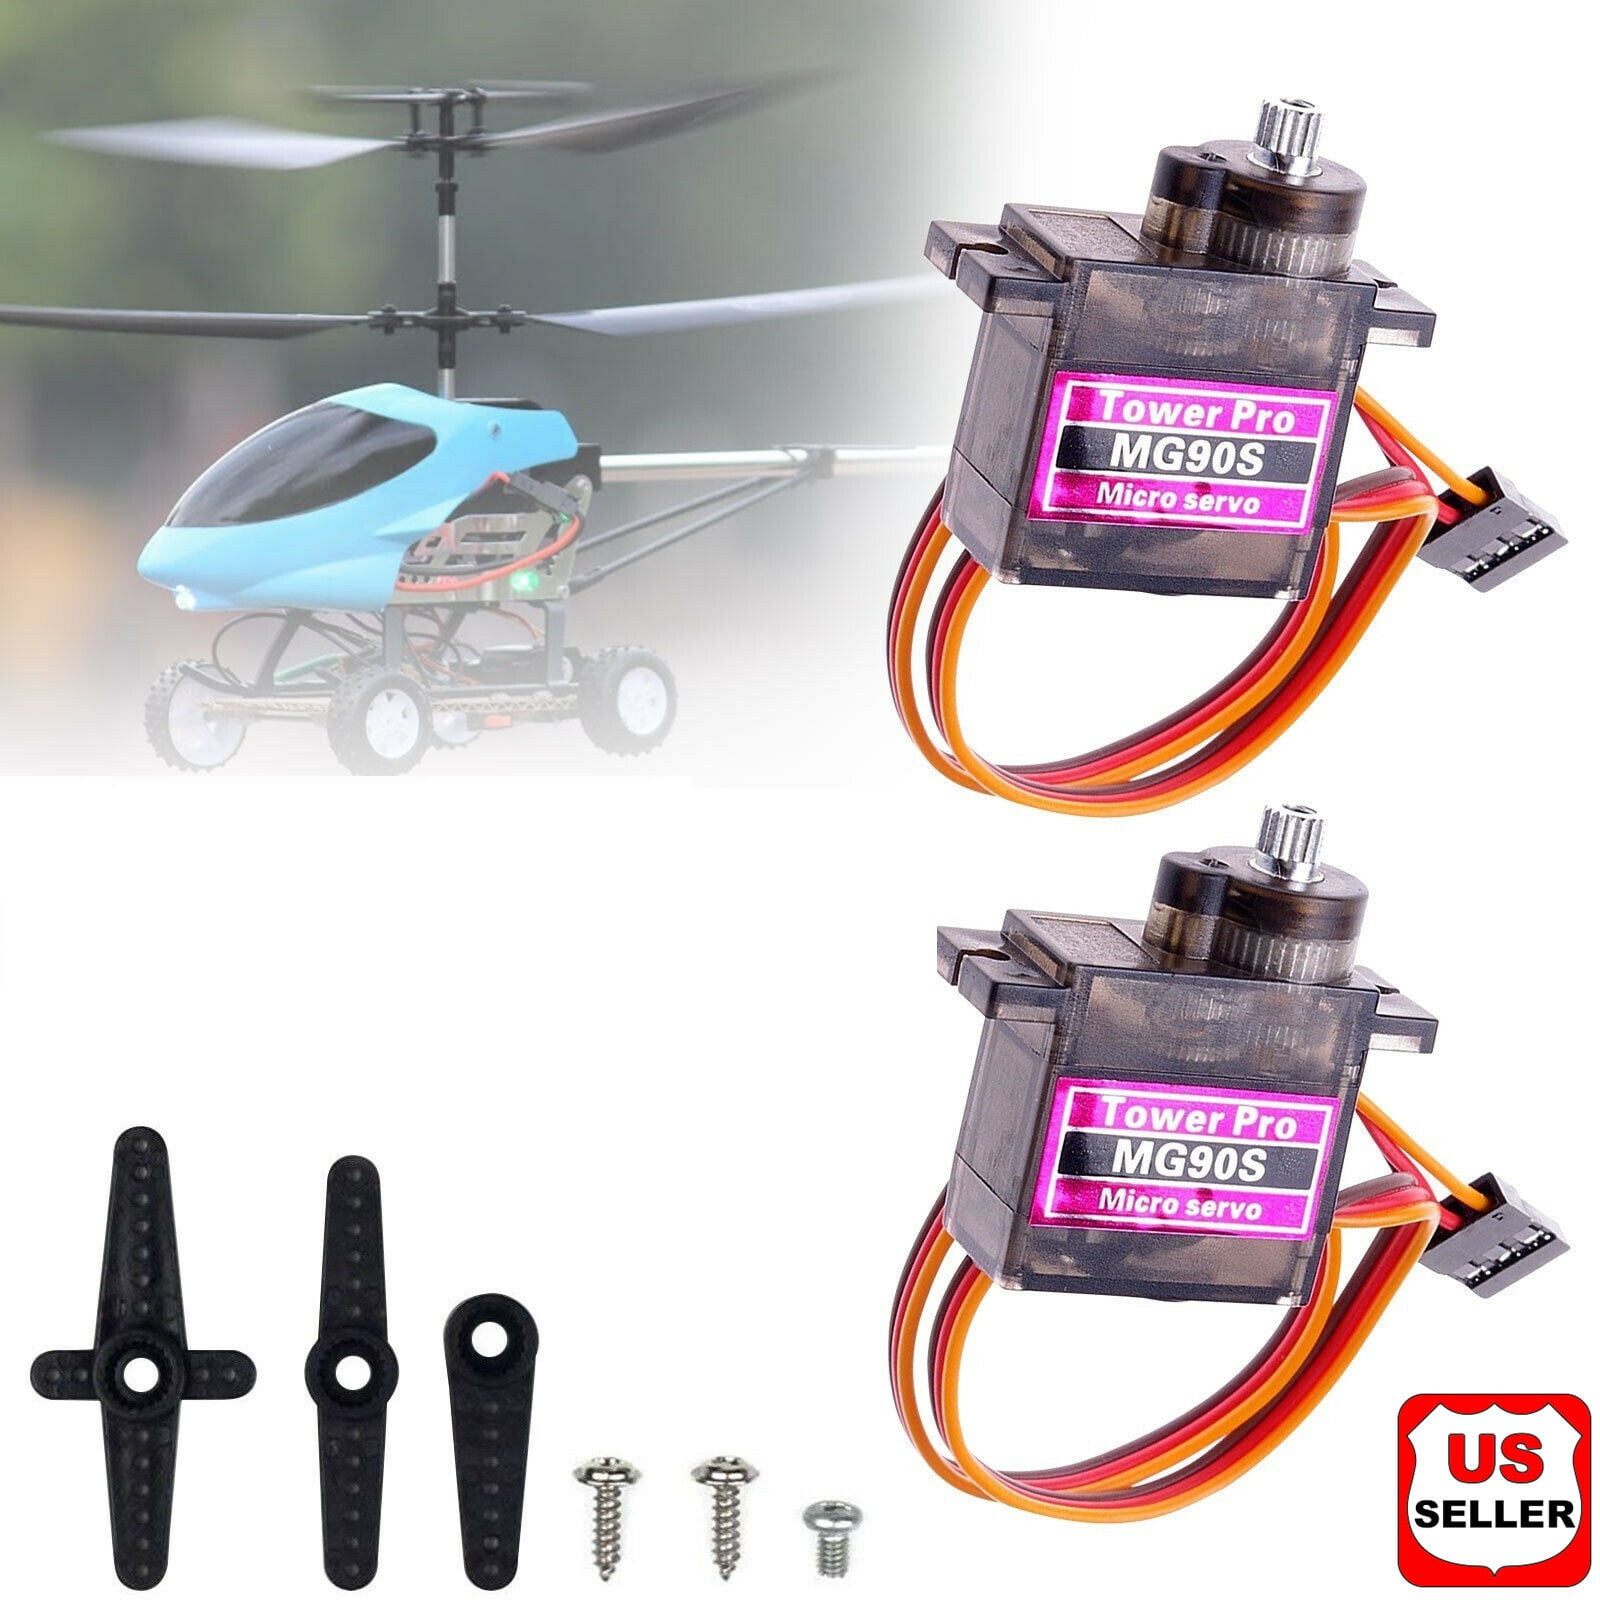 Details about   Mitoot MG90S Metal gear Digital 9g Servo For Rc Boat Helicopter Best P W2F6 US 